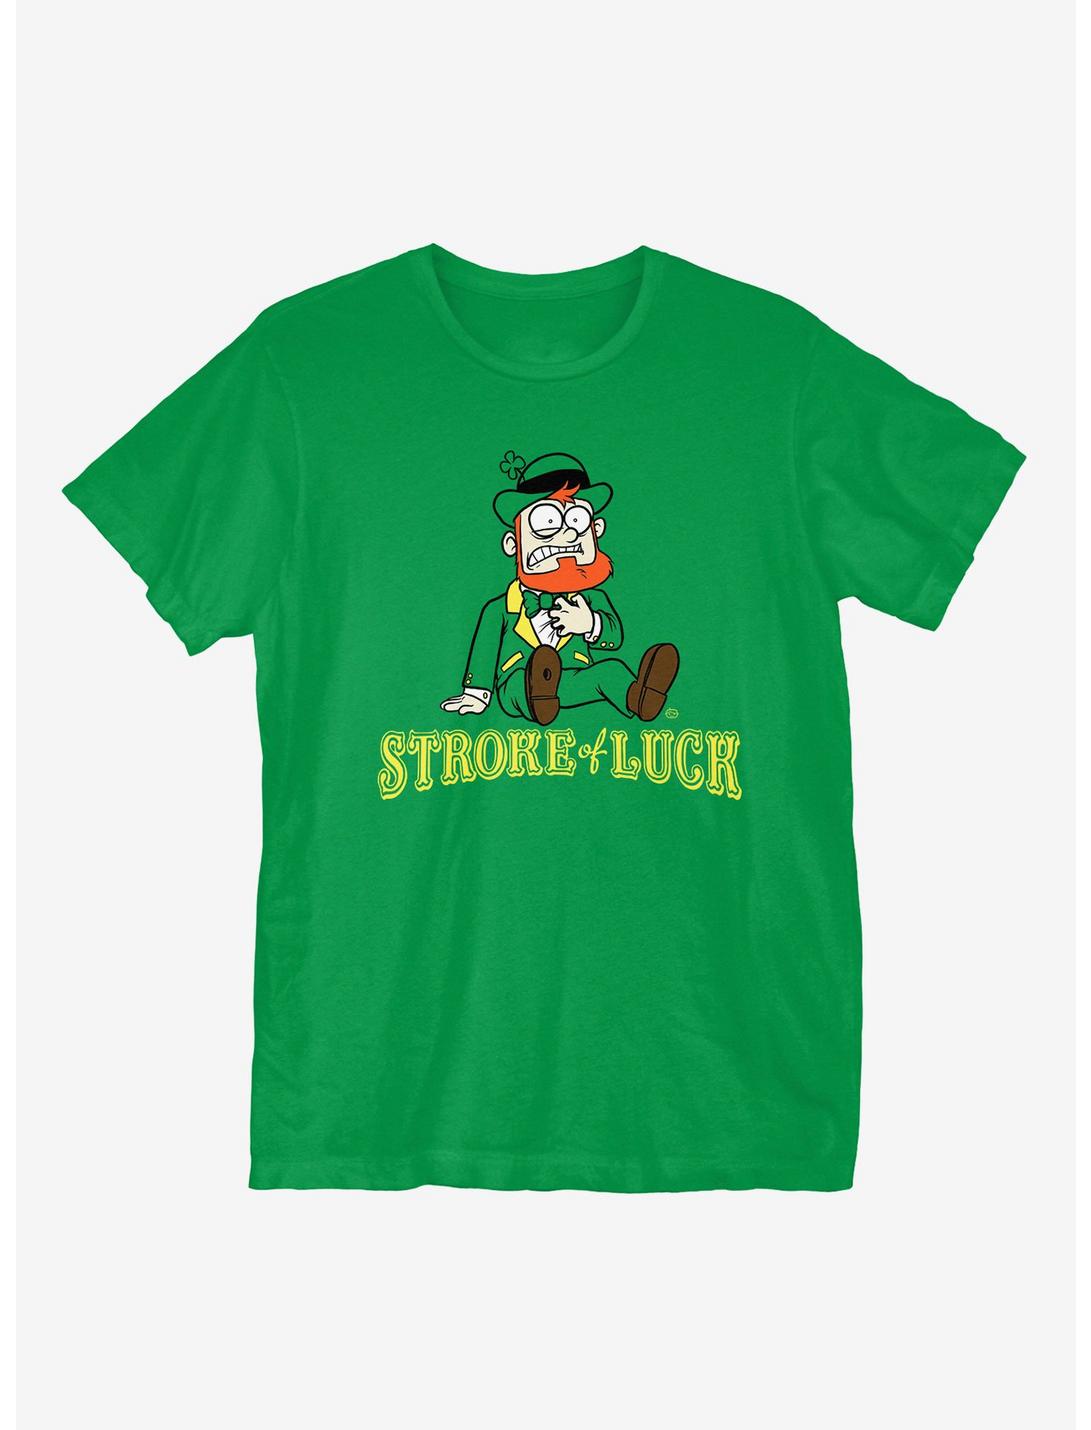 St. Patrick's Day Stroke Of Luck T-Shirt, KELLY GREEN, hi-res